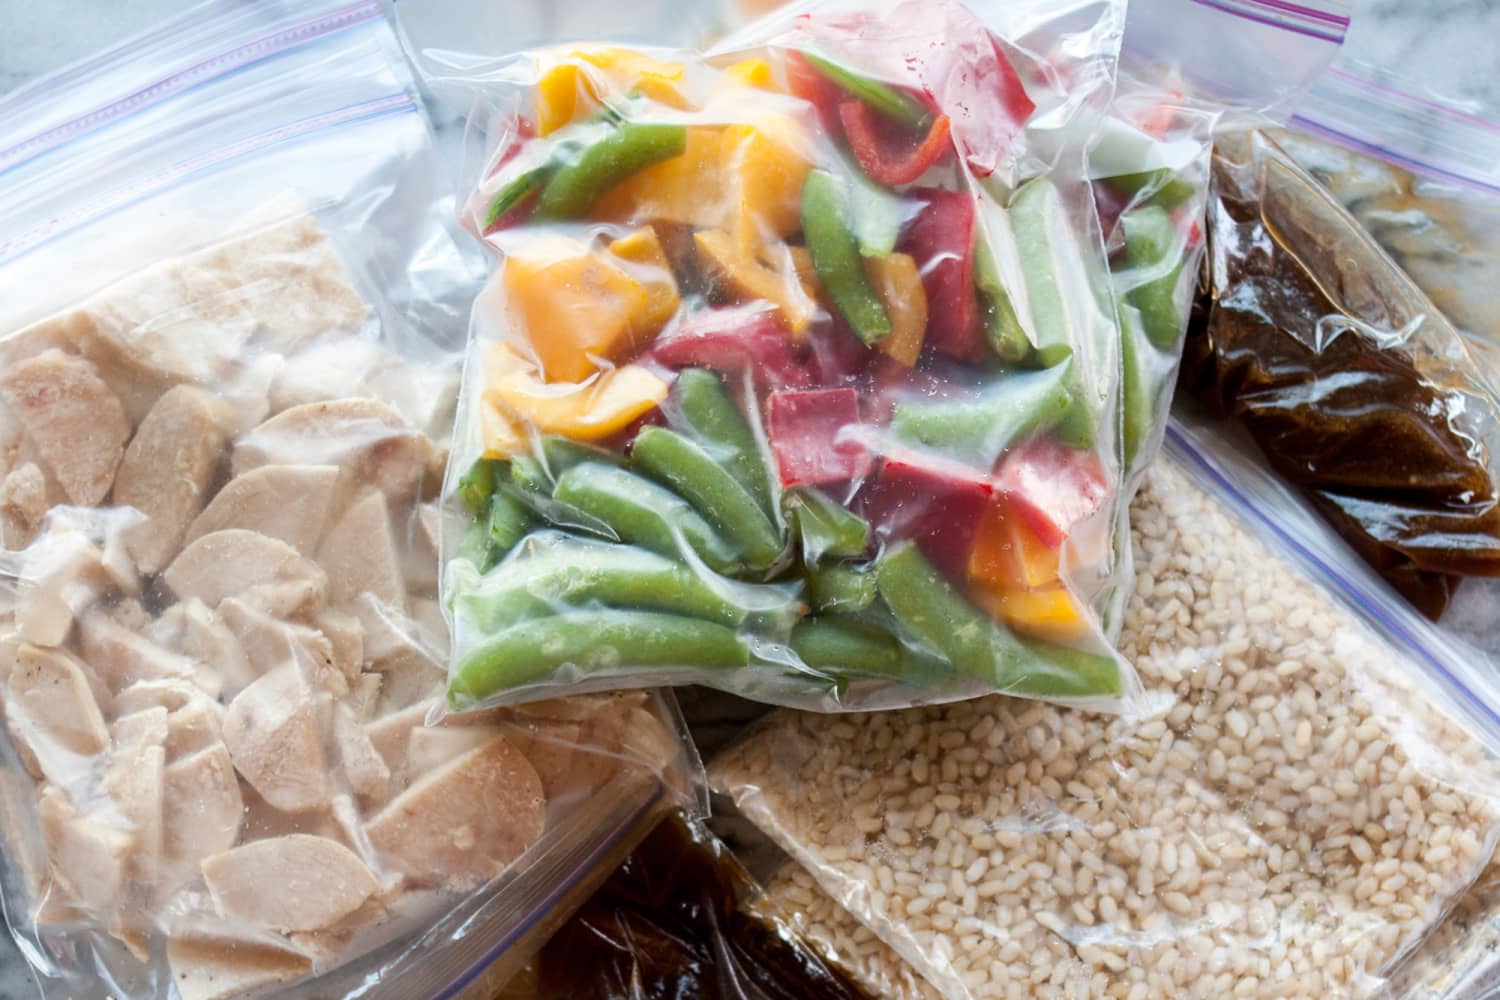 Two Easy Hacks for “Vacuum-Sealing” Bags Without a Vacuum Sealer | The ...